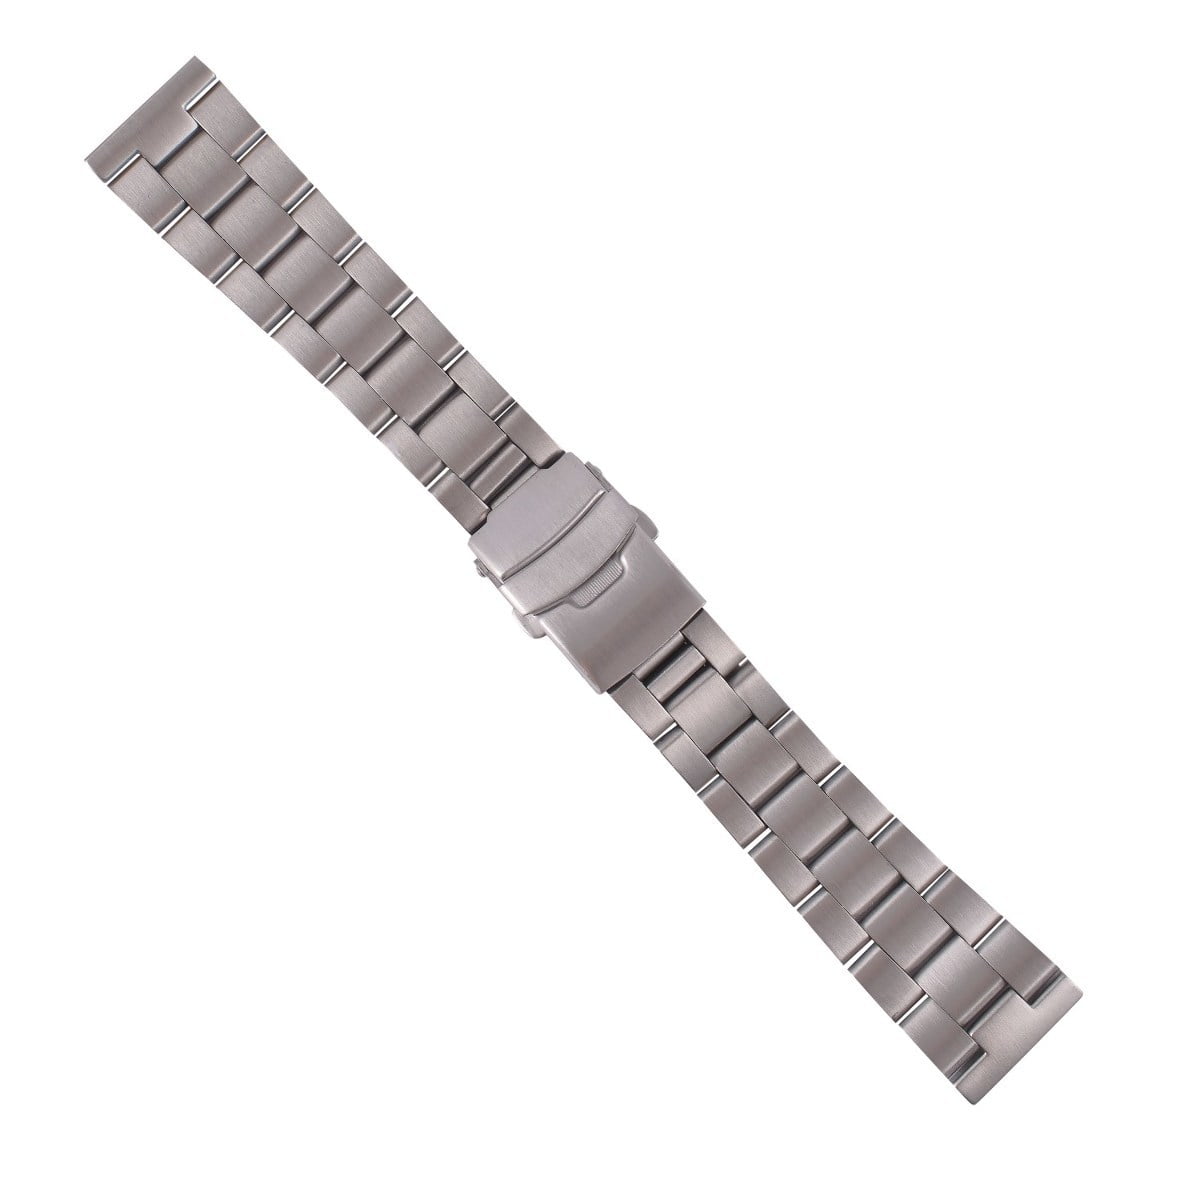 22MM HEAVY SOLID OYSTER WATCH BAND FOR SEIKO 5 7S26 SKX007 SKX009 SKX011J1  STEEL 